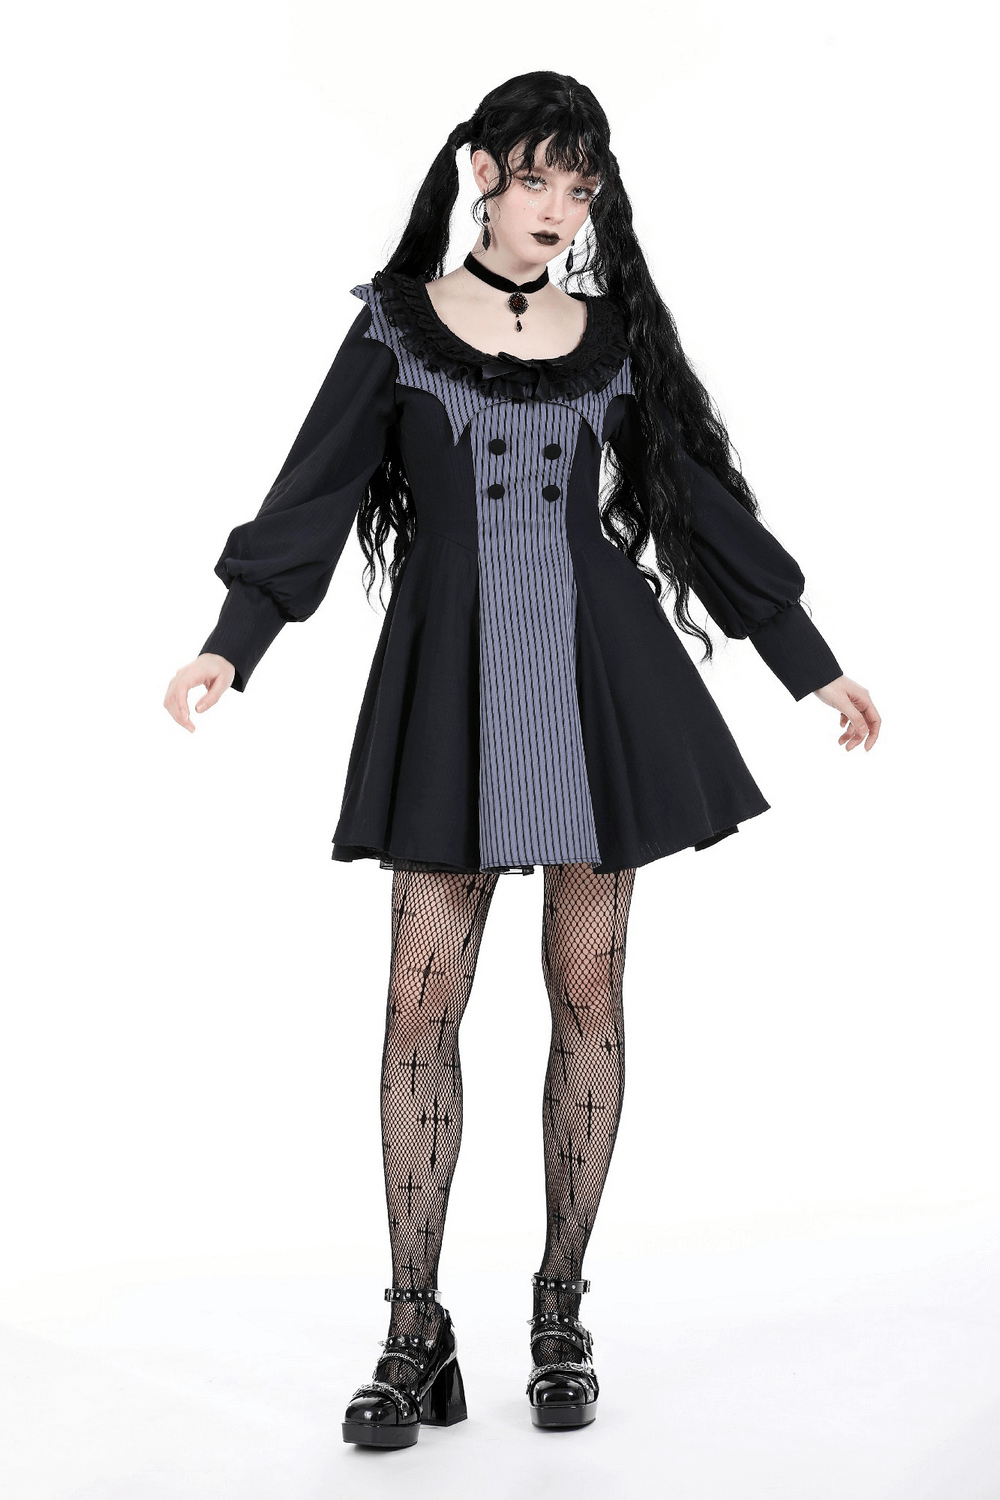 Black and Gray Striped Long Sleeve Dress with Ruffled Collar